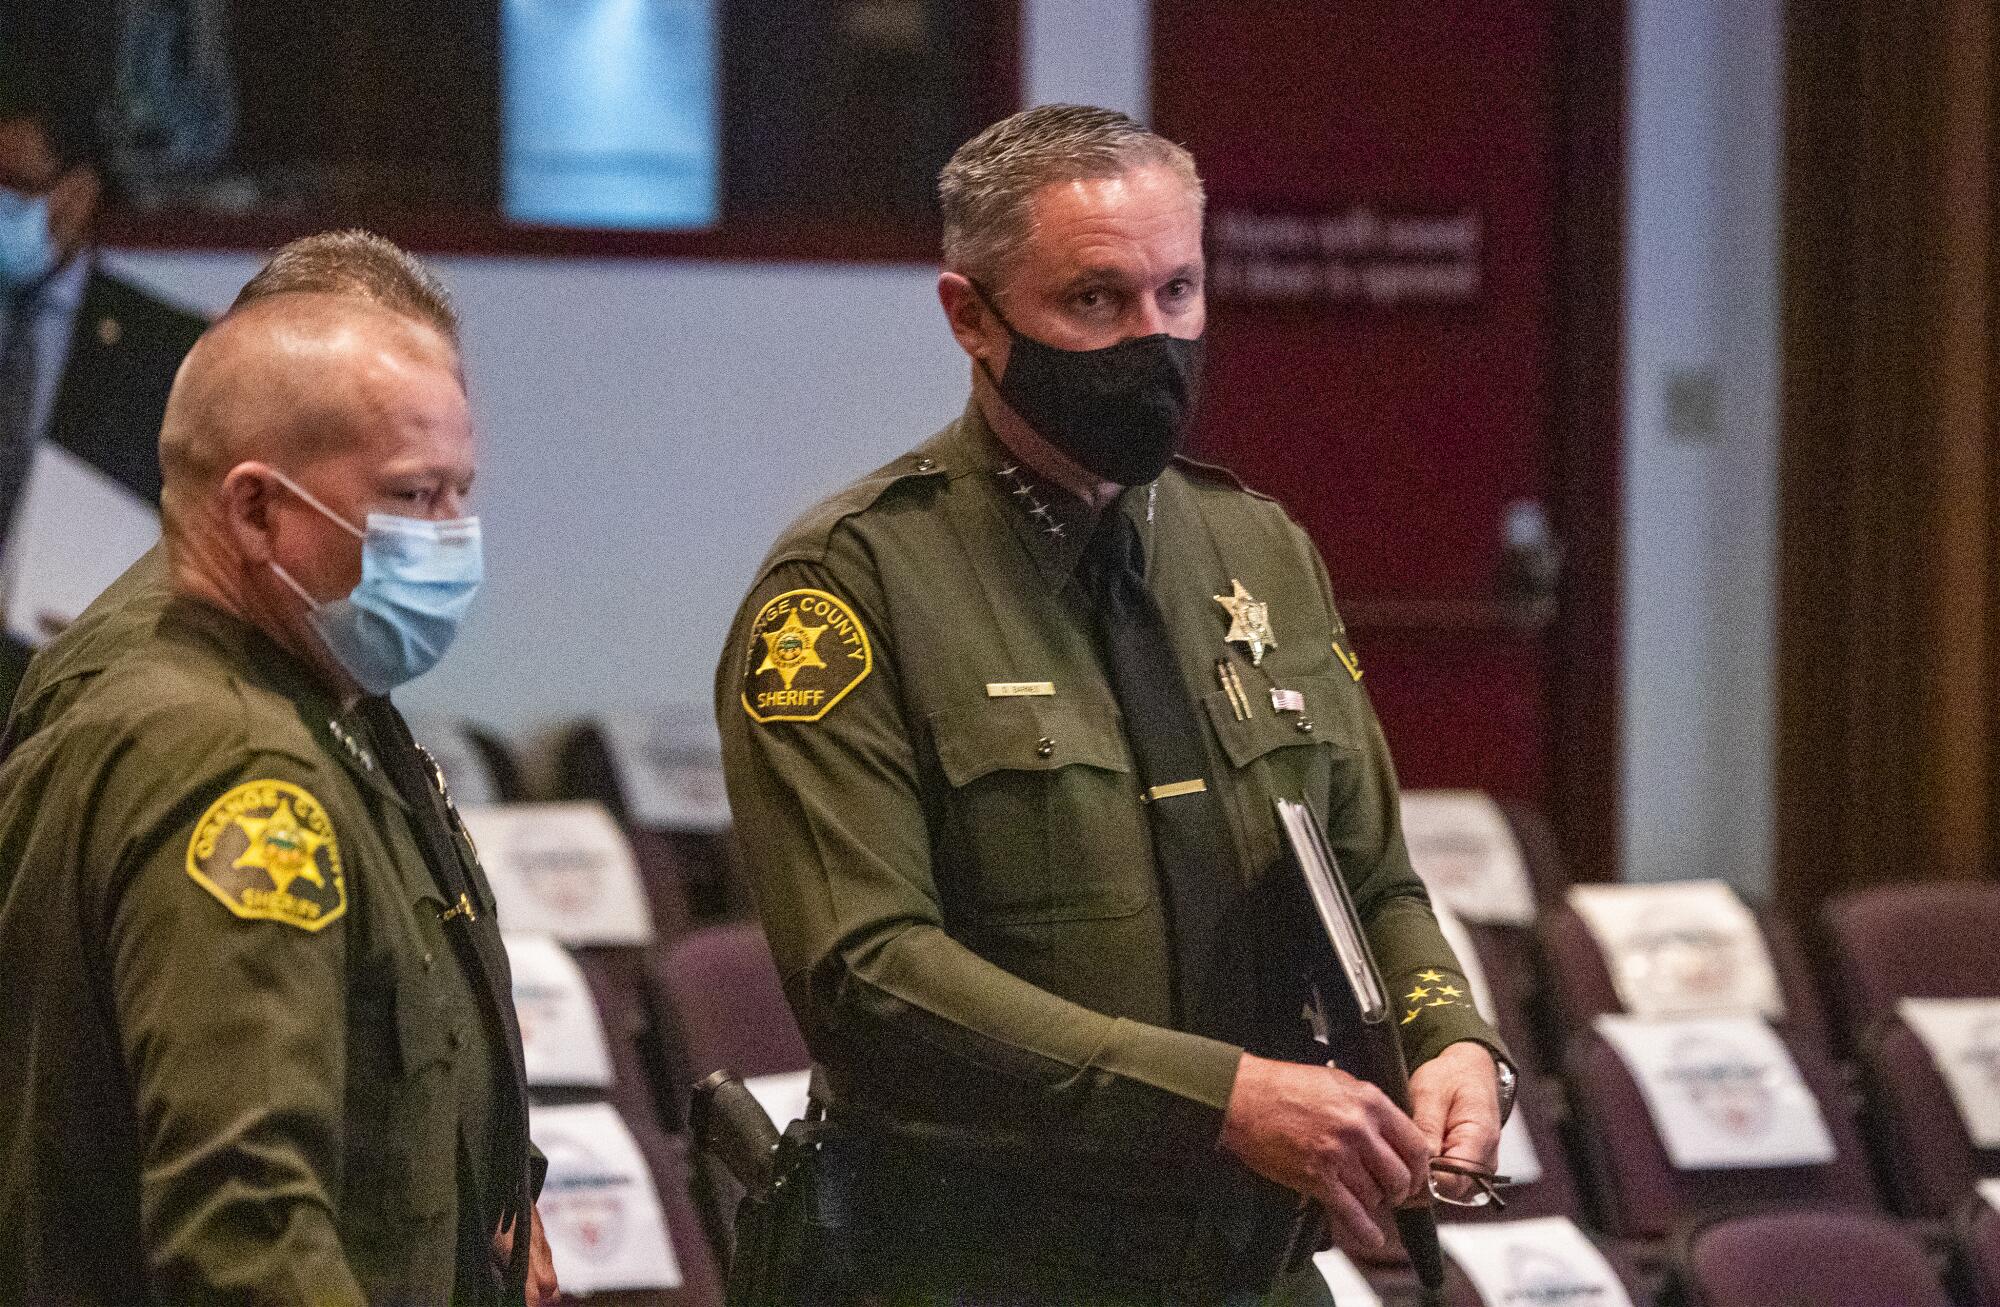 Orange County Sheriff Don Barnes, right, attends an Orange County Board of Supervisors meeting.